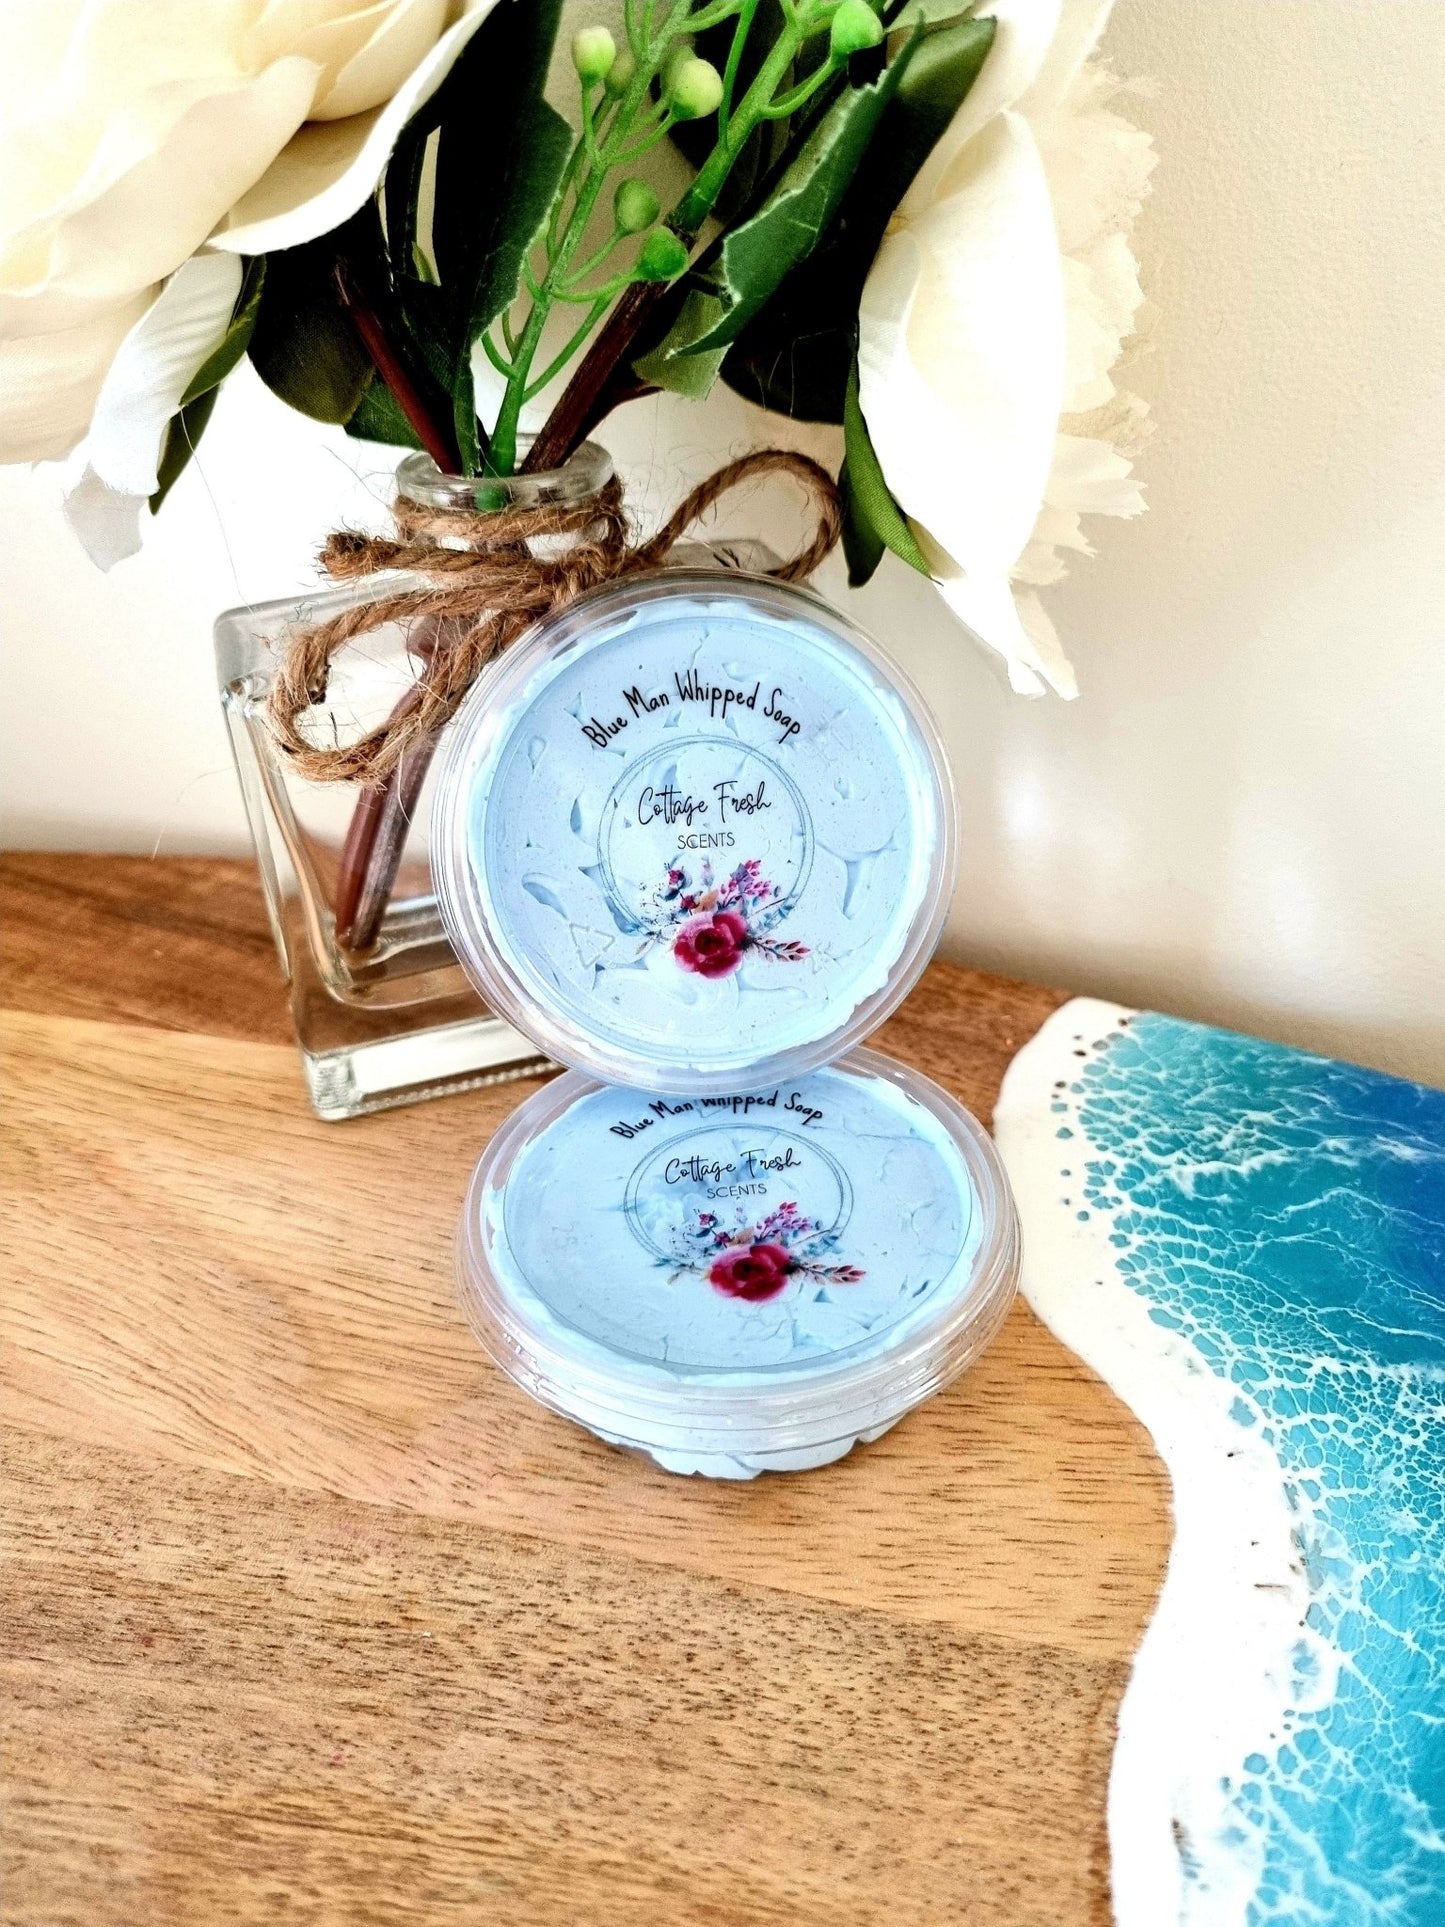 Blue Man Whipped Soap - Whipped Soap - Cottage Fresh Scents